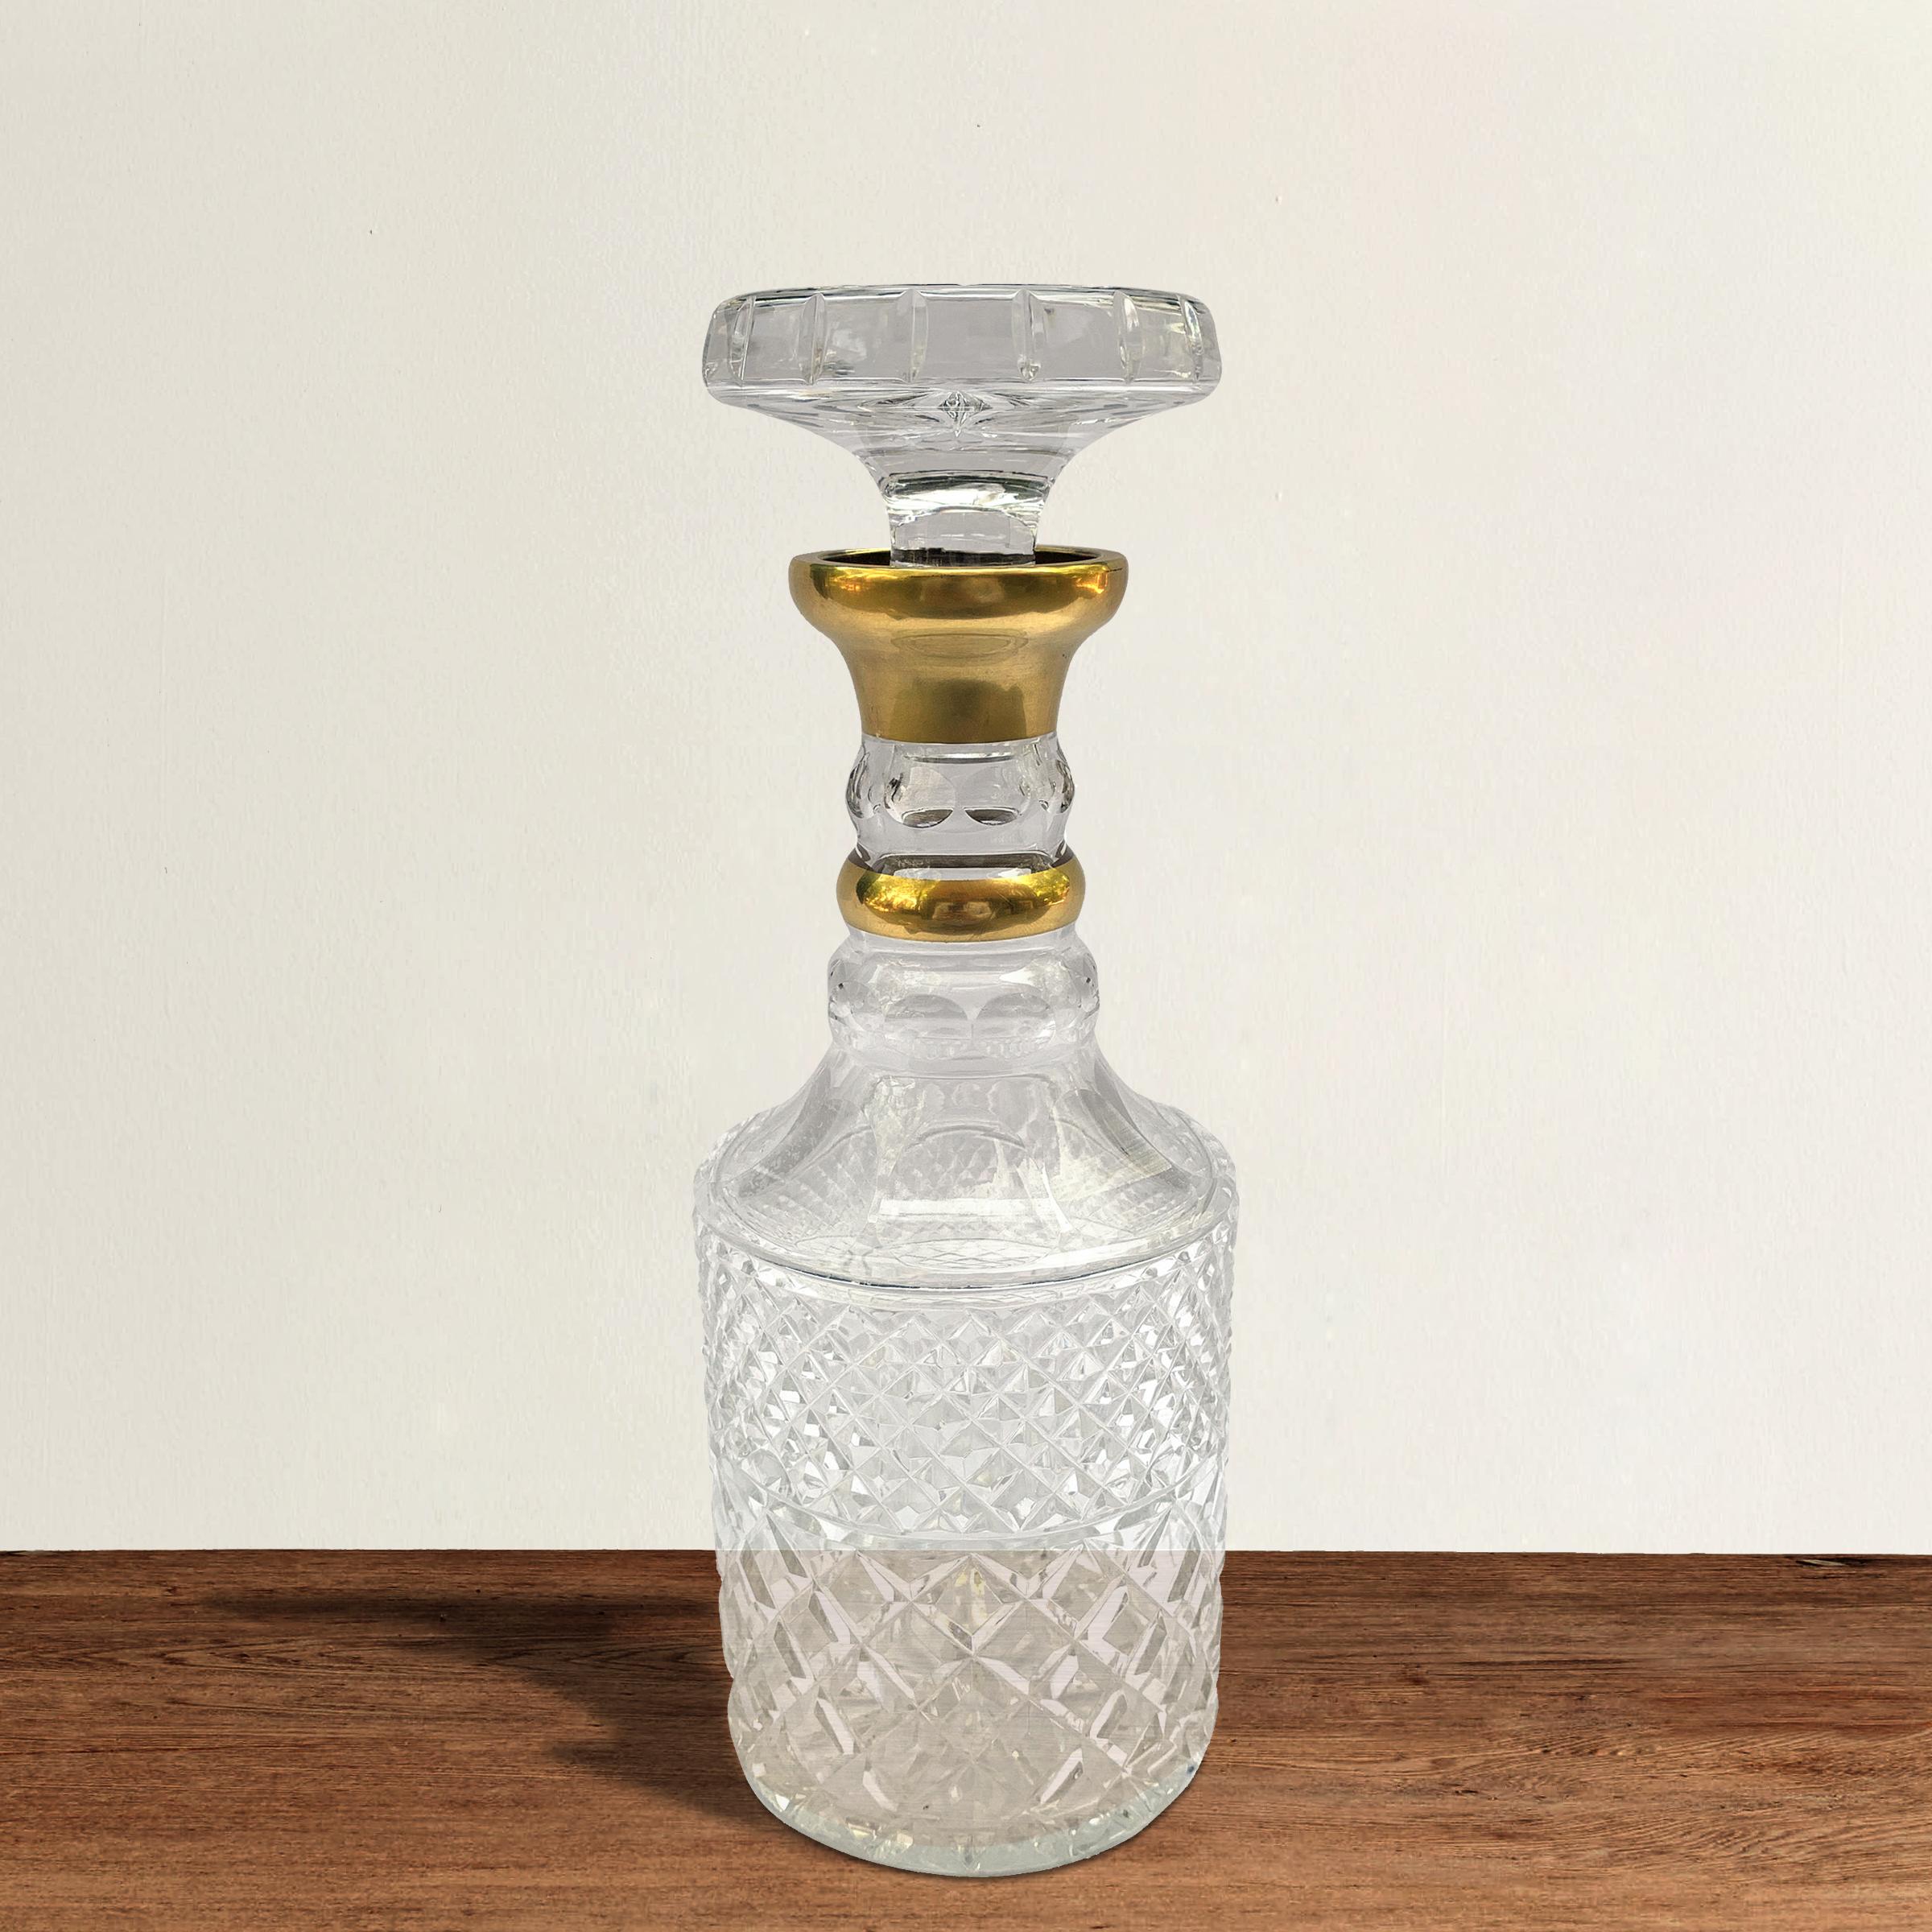 A beautiful mid-20th century German handcut crystal decanter with stopper, gilt details on the neck, and diamond cutting around the base. The top of the stopper and the foot are both cut with a star pattern.